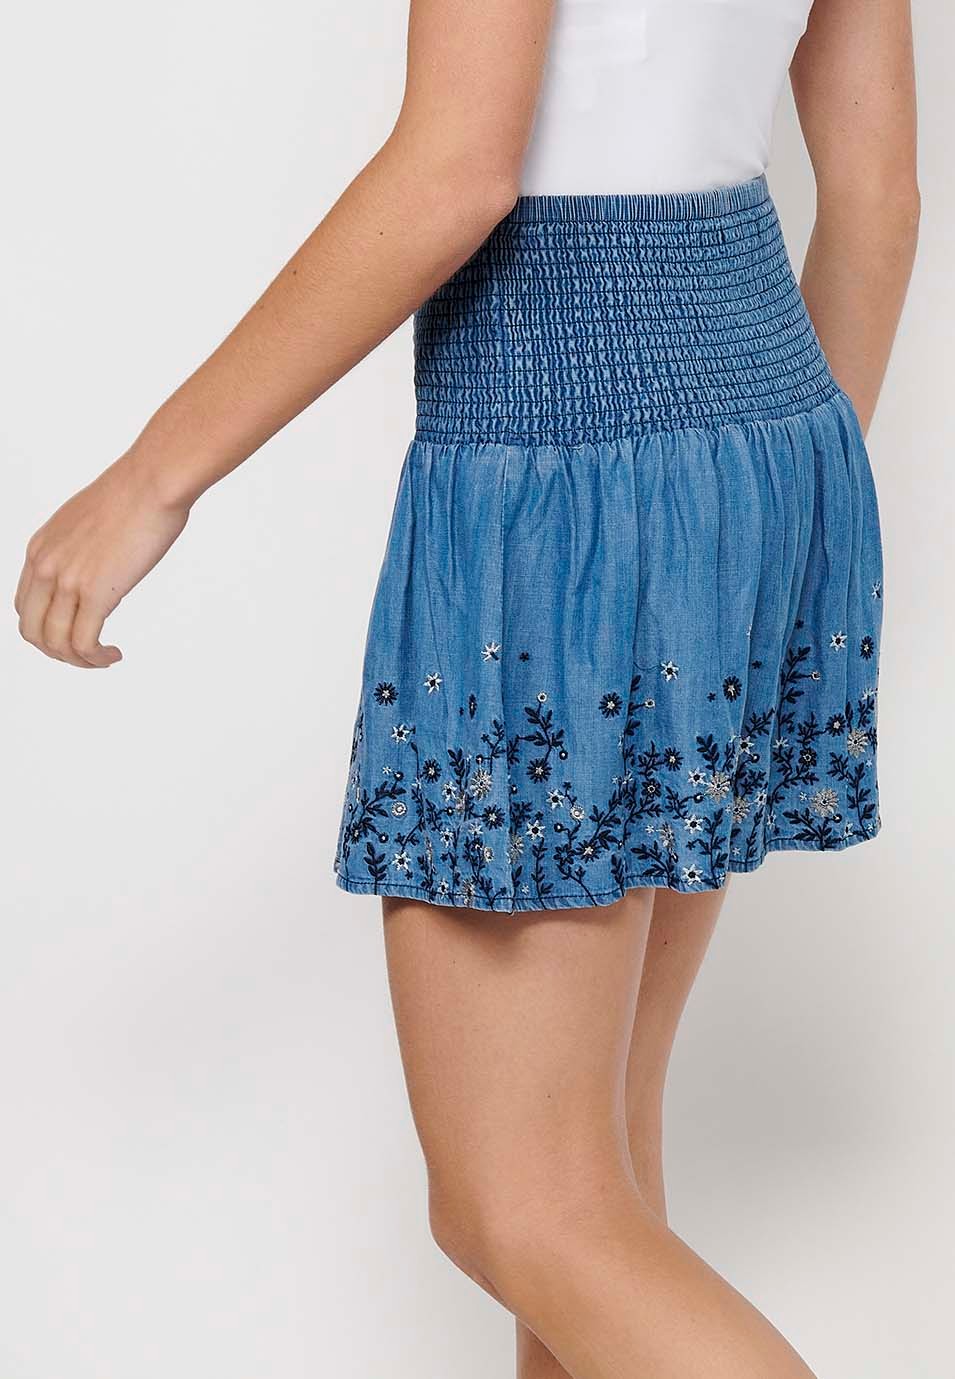 Short skirt with wide elastic waist and finished with blue floral embroidery for Women 5